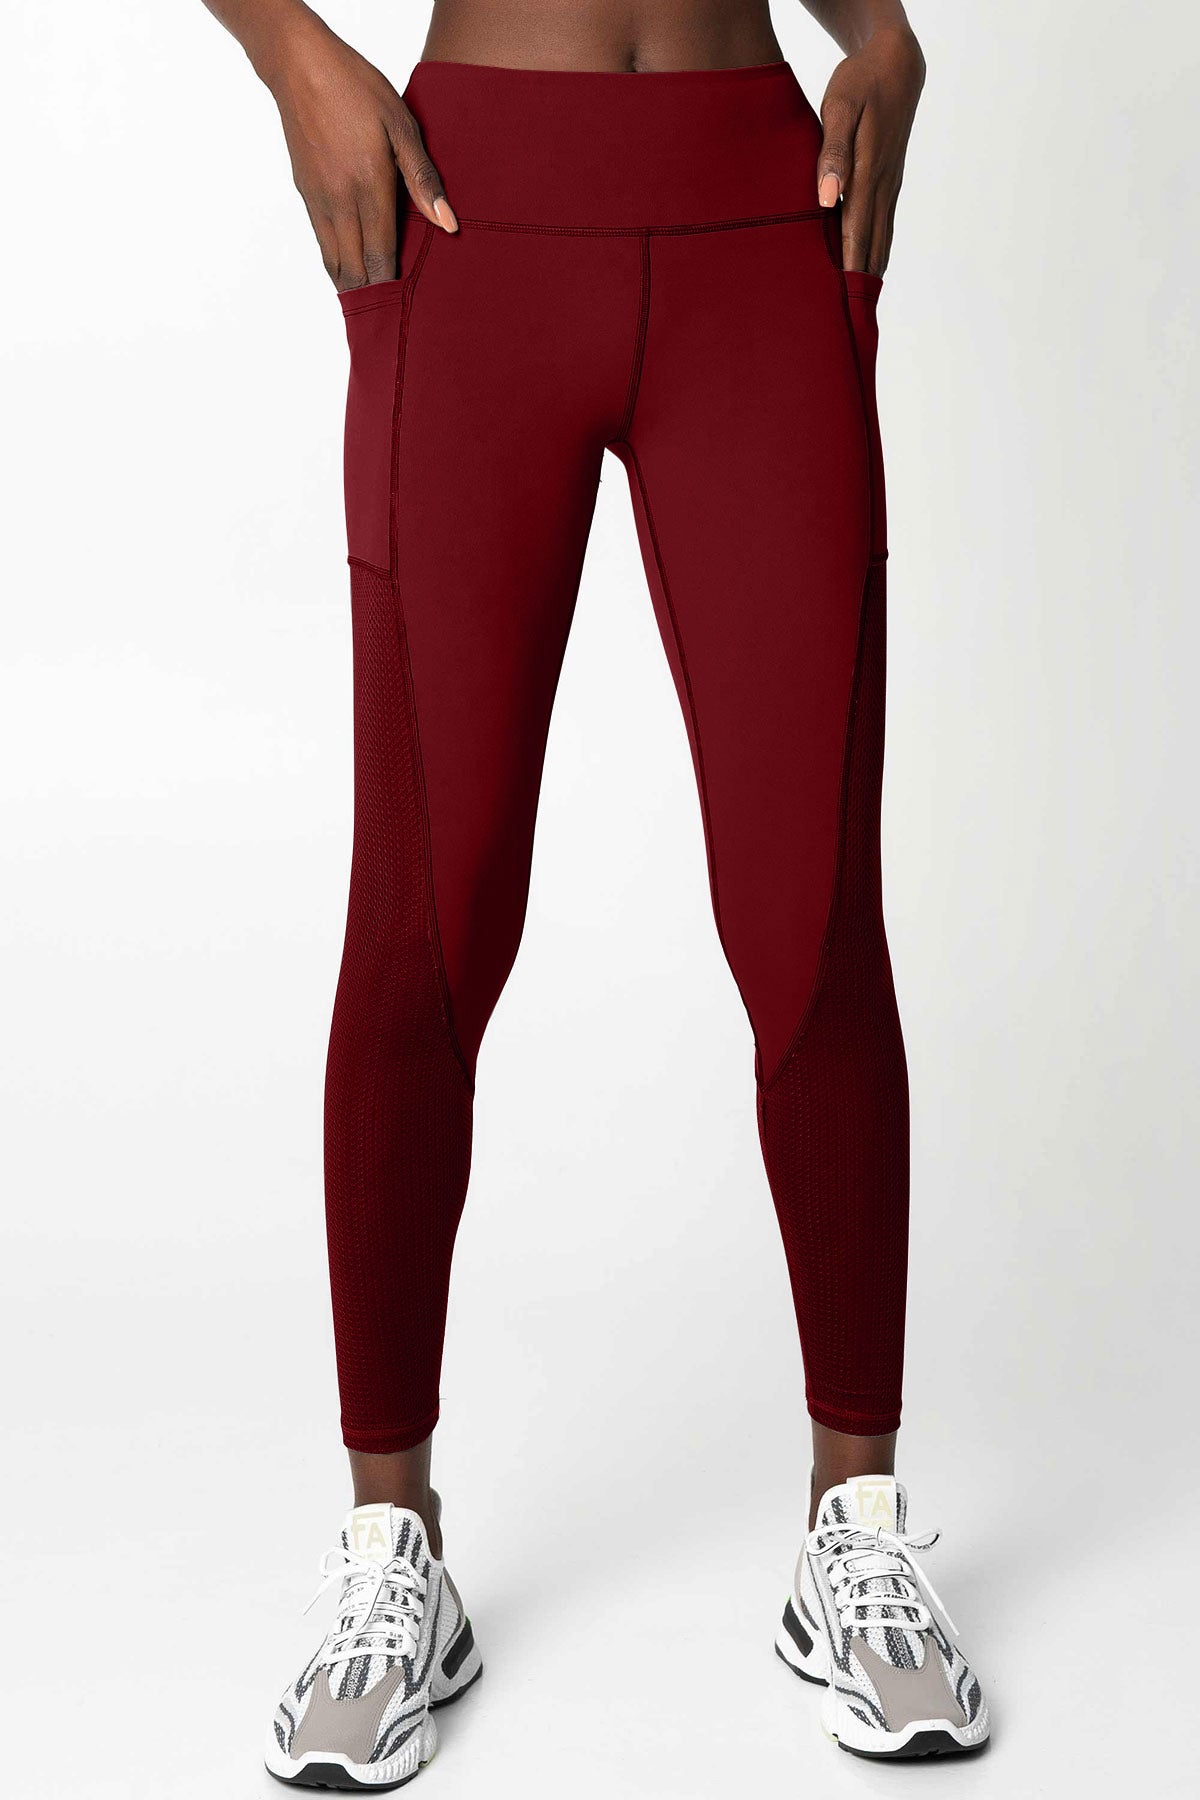 Image of SALE! Maroon Red Cassi Mesh & Pockets Workout Leggings Yoga Pants - Women